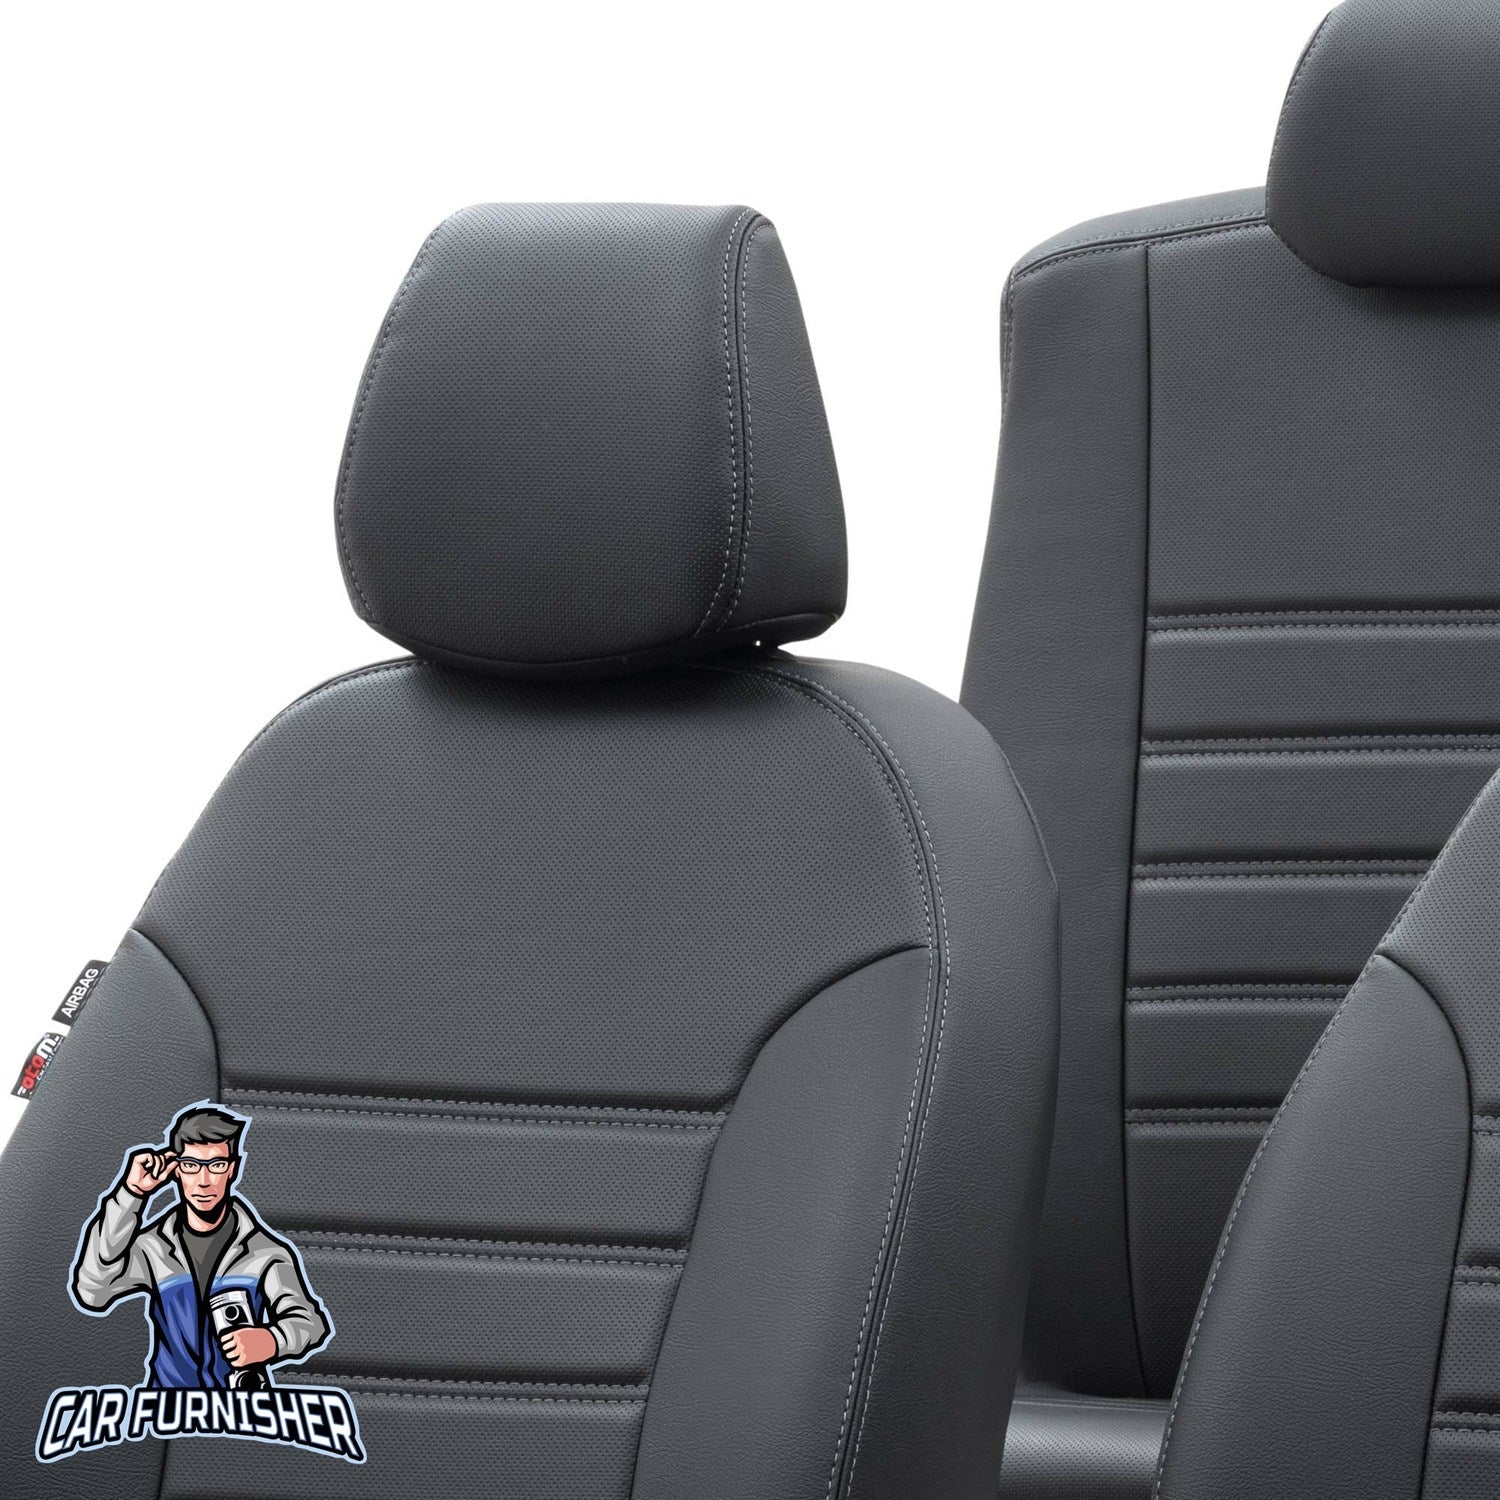 Volkswagen Golf Car Seat Covers: The Ultimate Makeover!